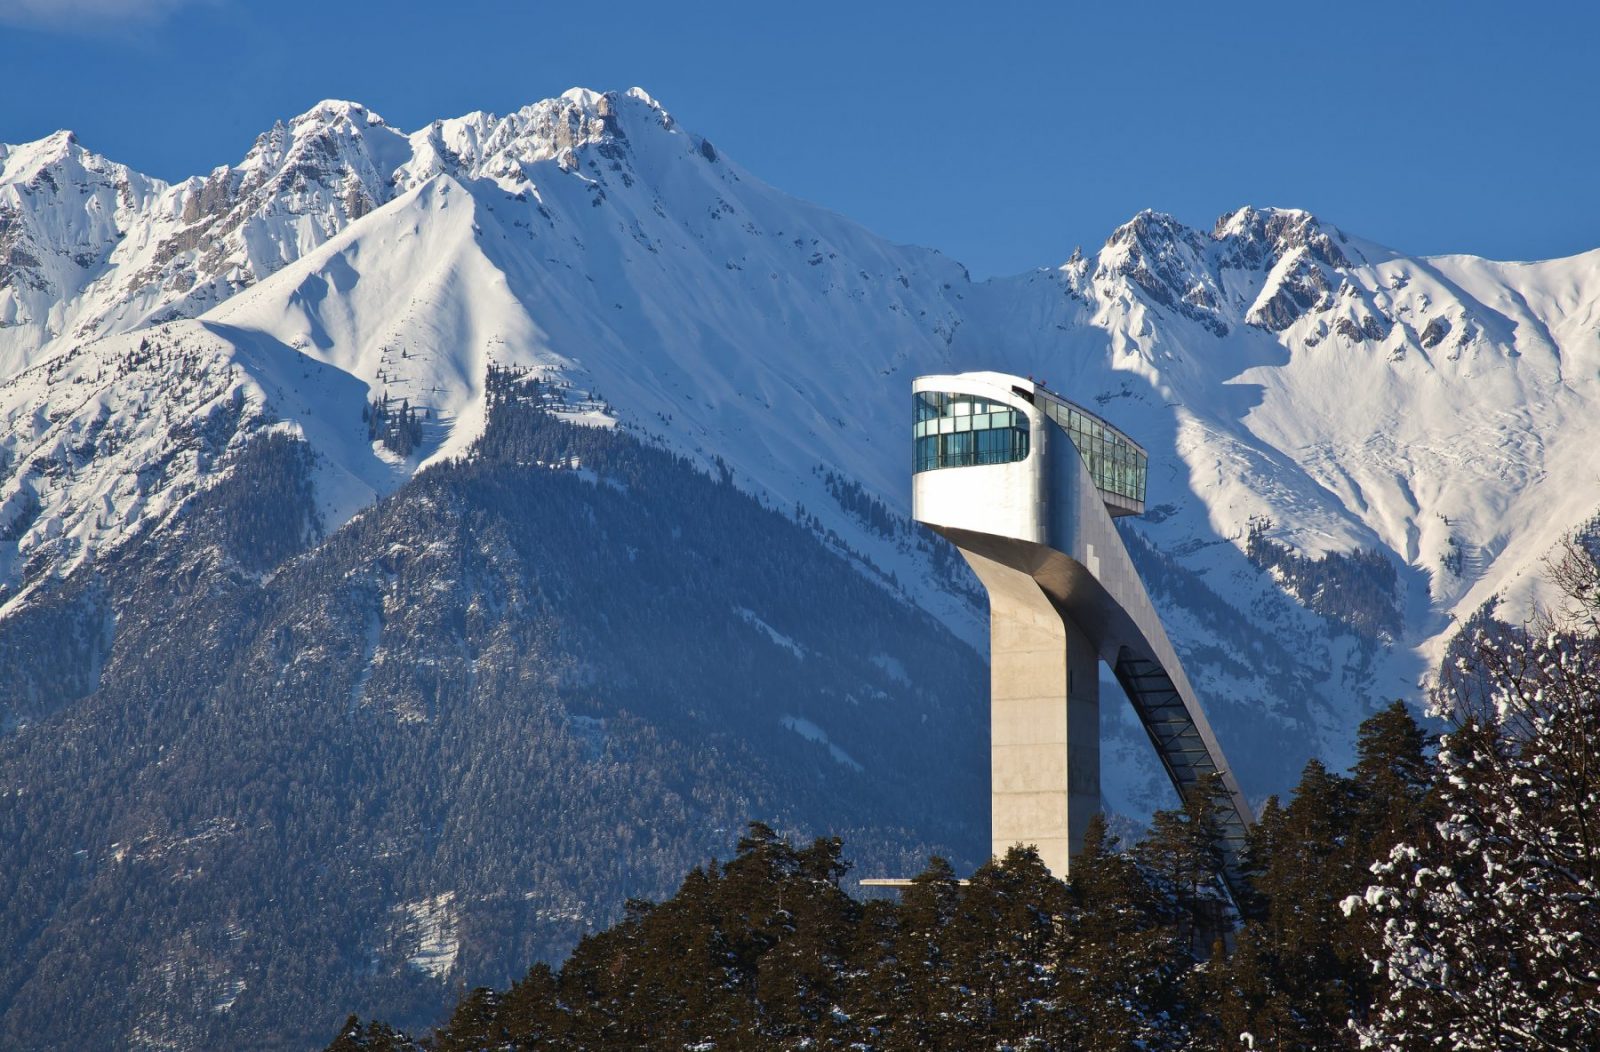 Bergisel Ski Jump. Copyright: Innsbruck Tourismus. For fanatics of Architecture, plan your multi-stop visit to Austria post Covid19.